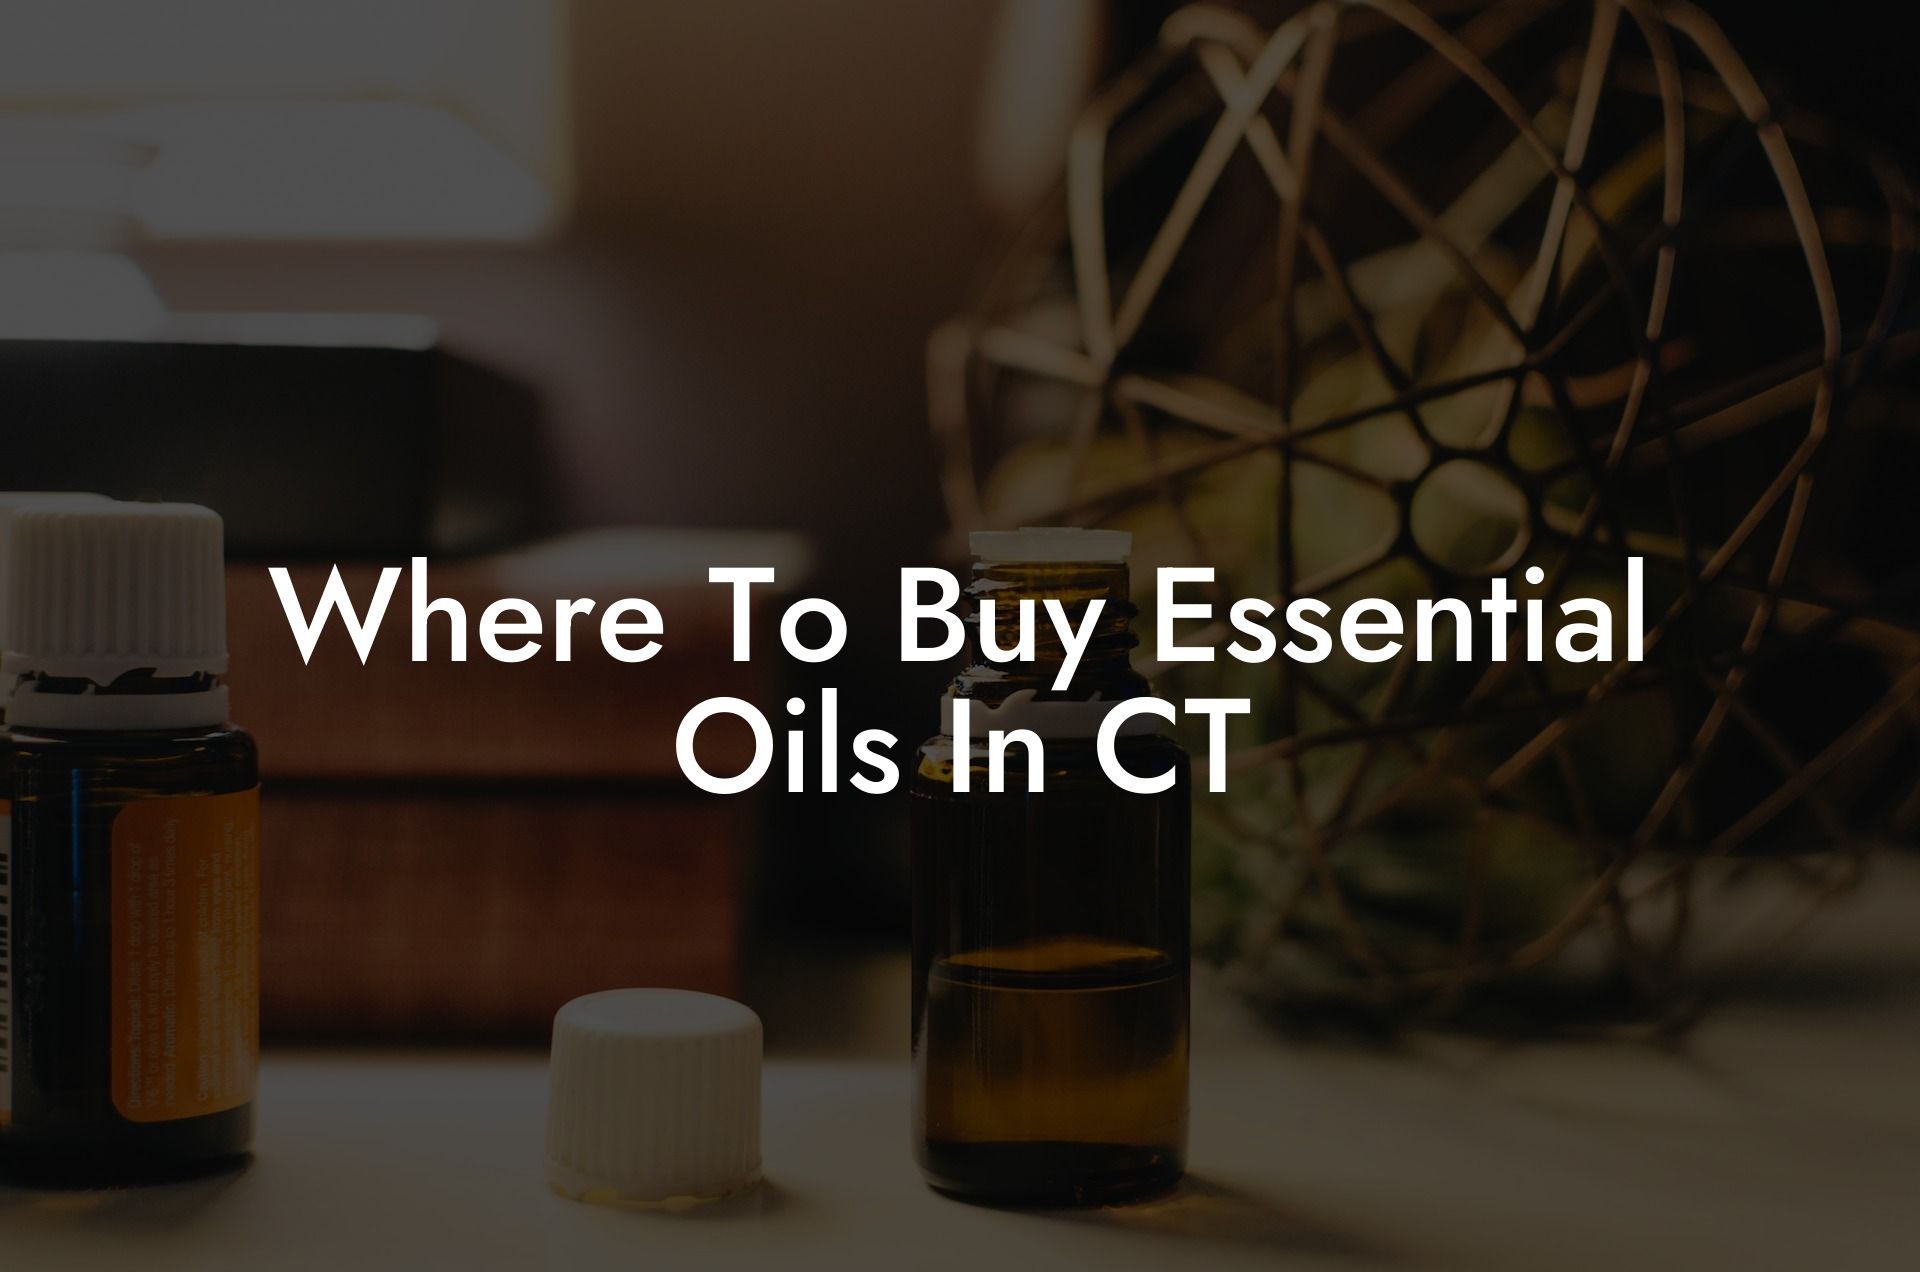 Where To Buy Essential Oils In CT